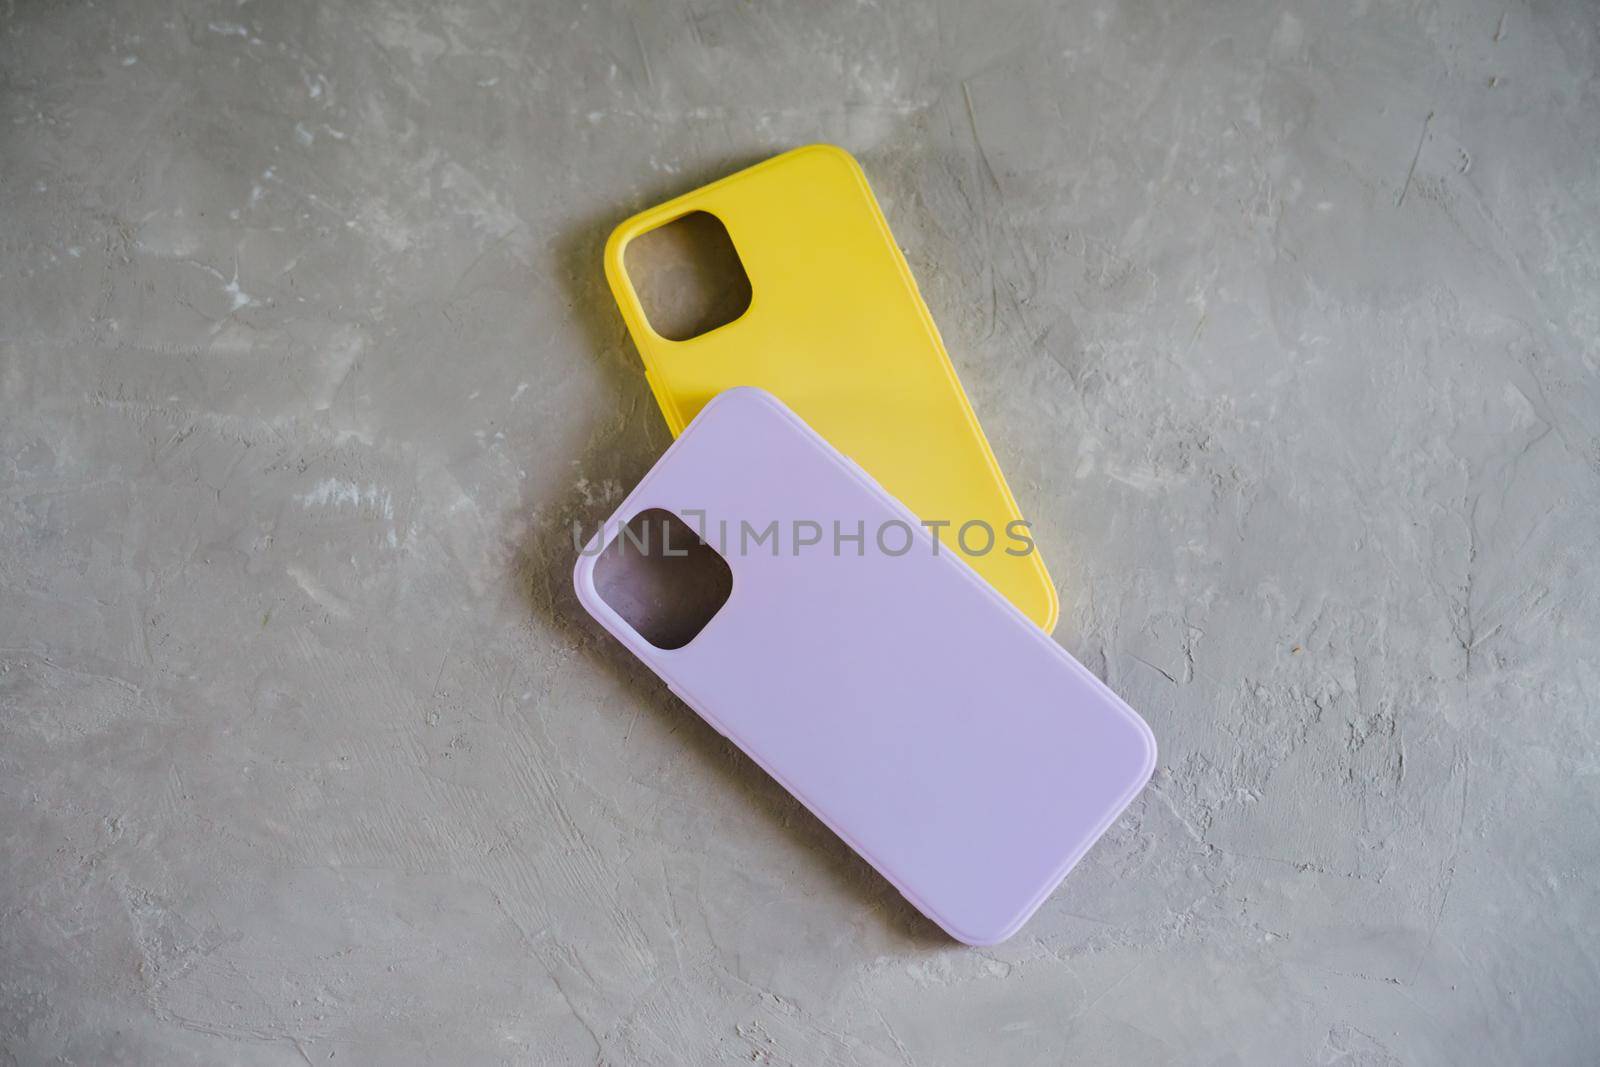 Yellow and lilac protective cases for smartphone. Two silicone cases on a textured gray background.